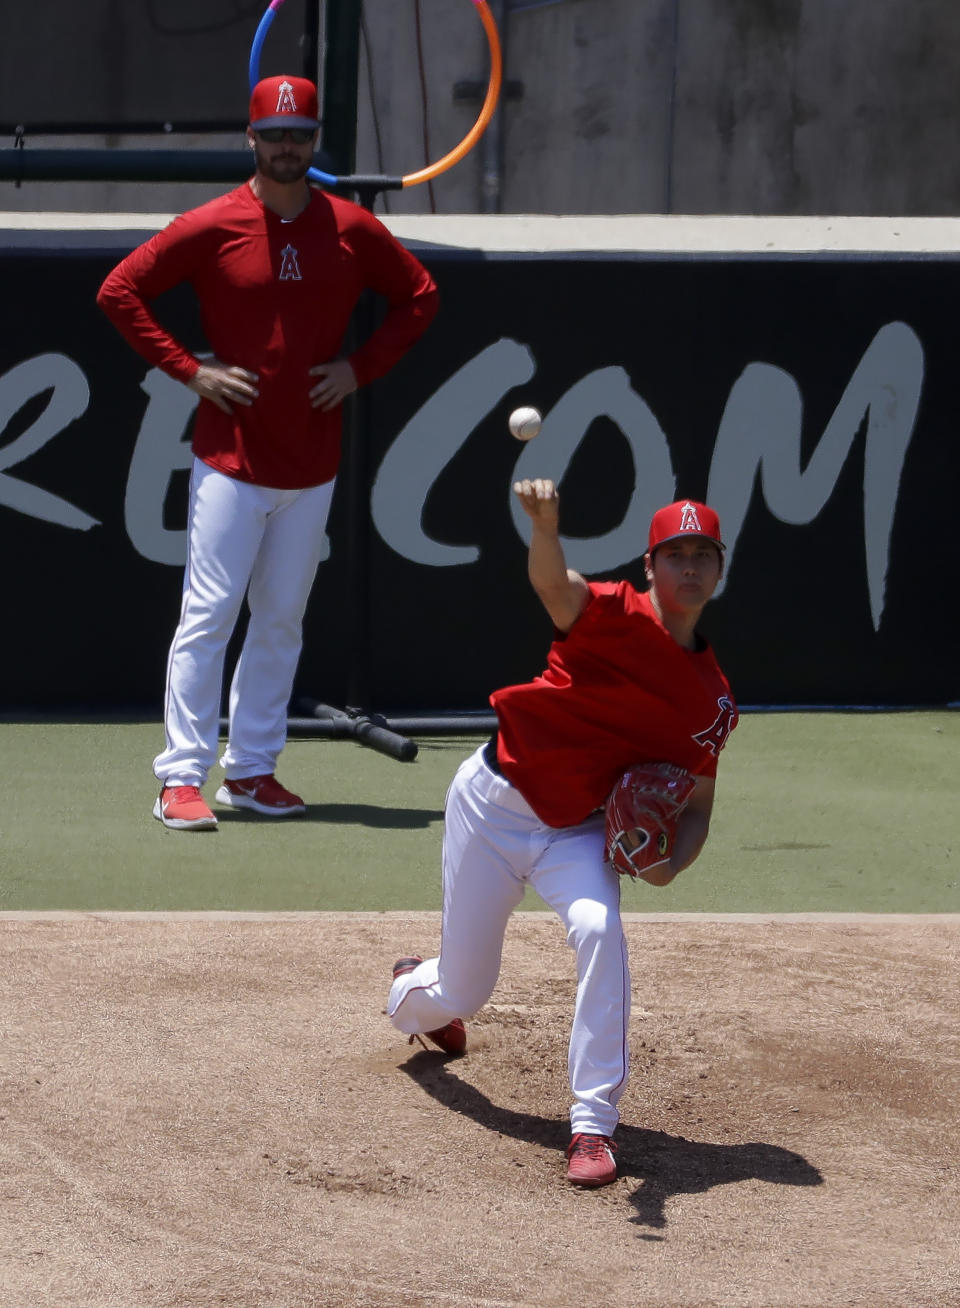 Los Angeles Angels' Shohei Ohtani, right, throws as pitching coach Doug White on in the bullpen before a baseball game against the Cincinnati Reds in Anaheim, Calif., Wednesday, June 26, 2019. Ohtani threw off a mound for the first time since Tommy John surgery Oct 1, 2018. (AP Photo/Chris Carlson)